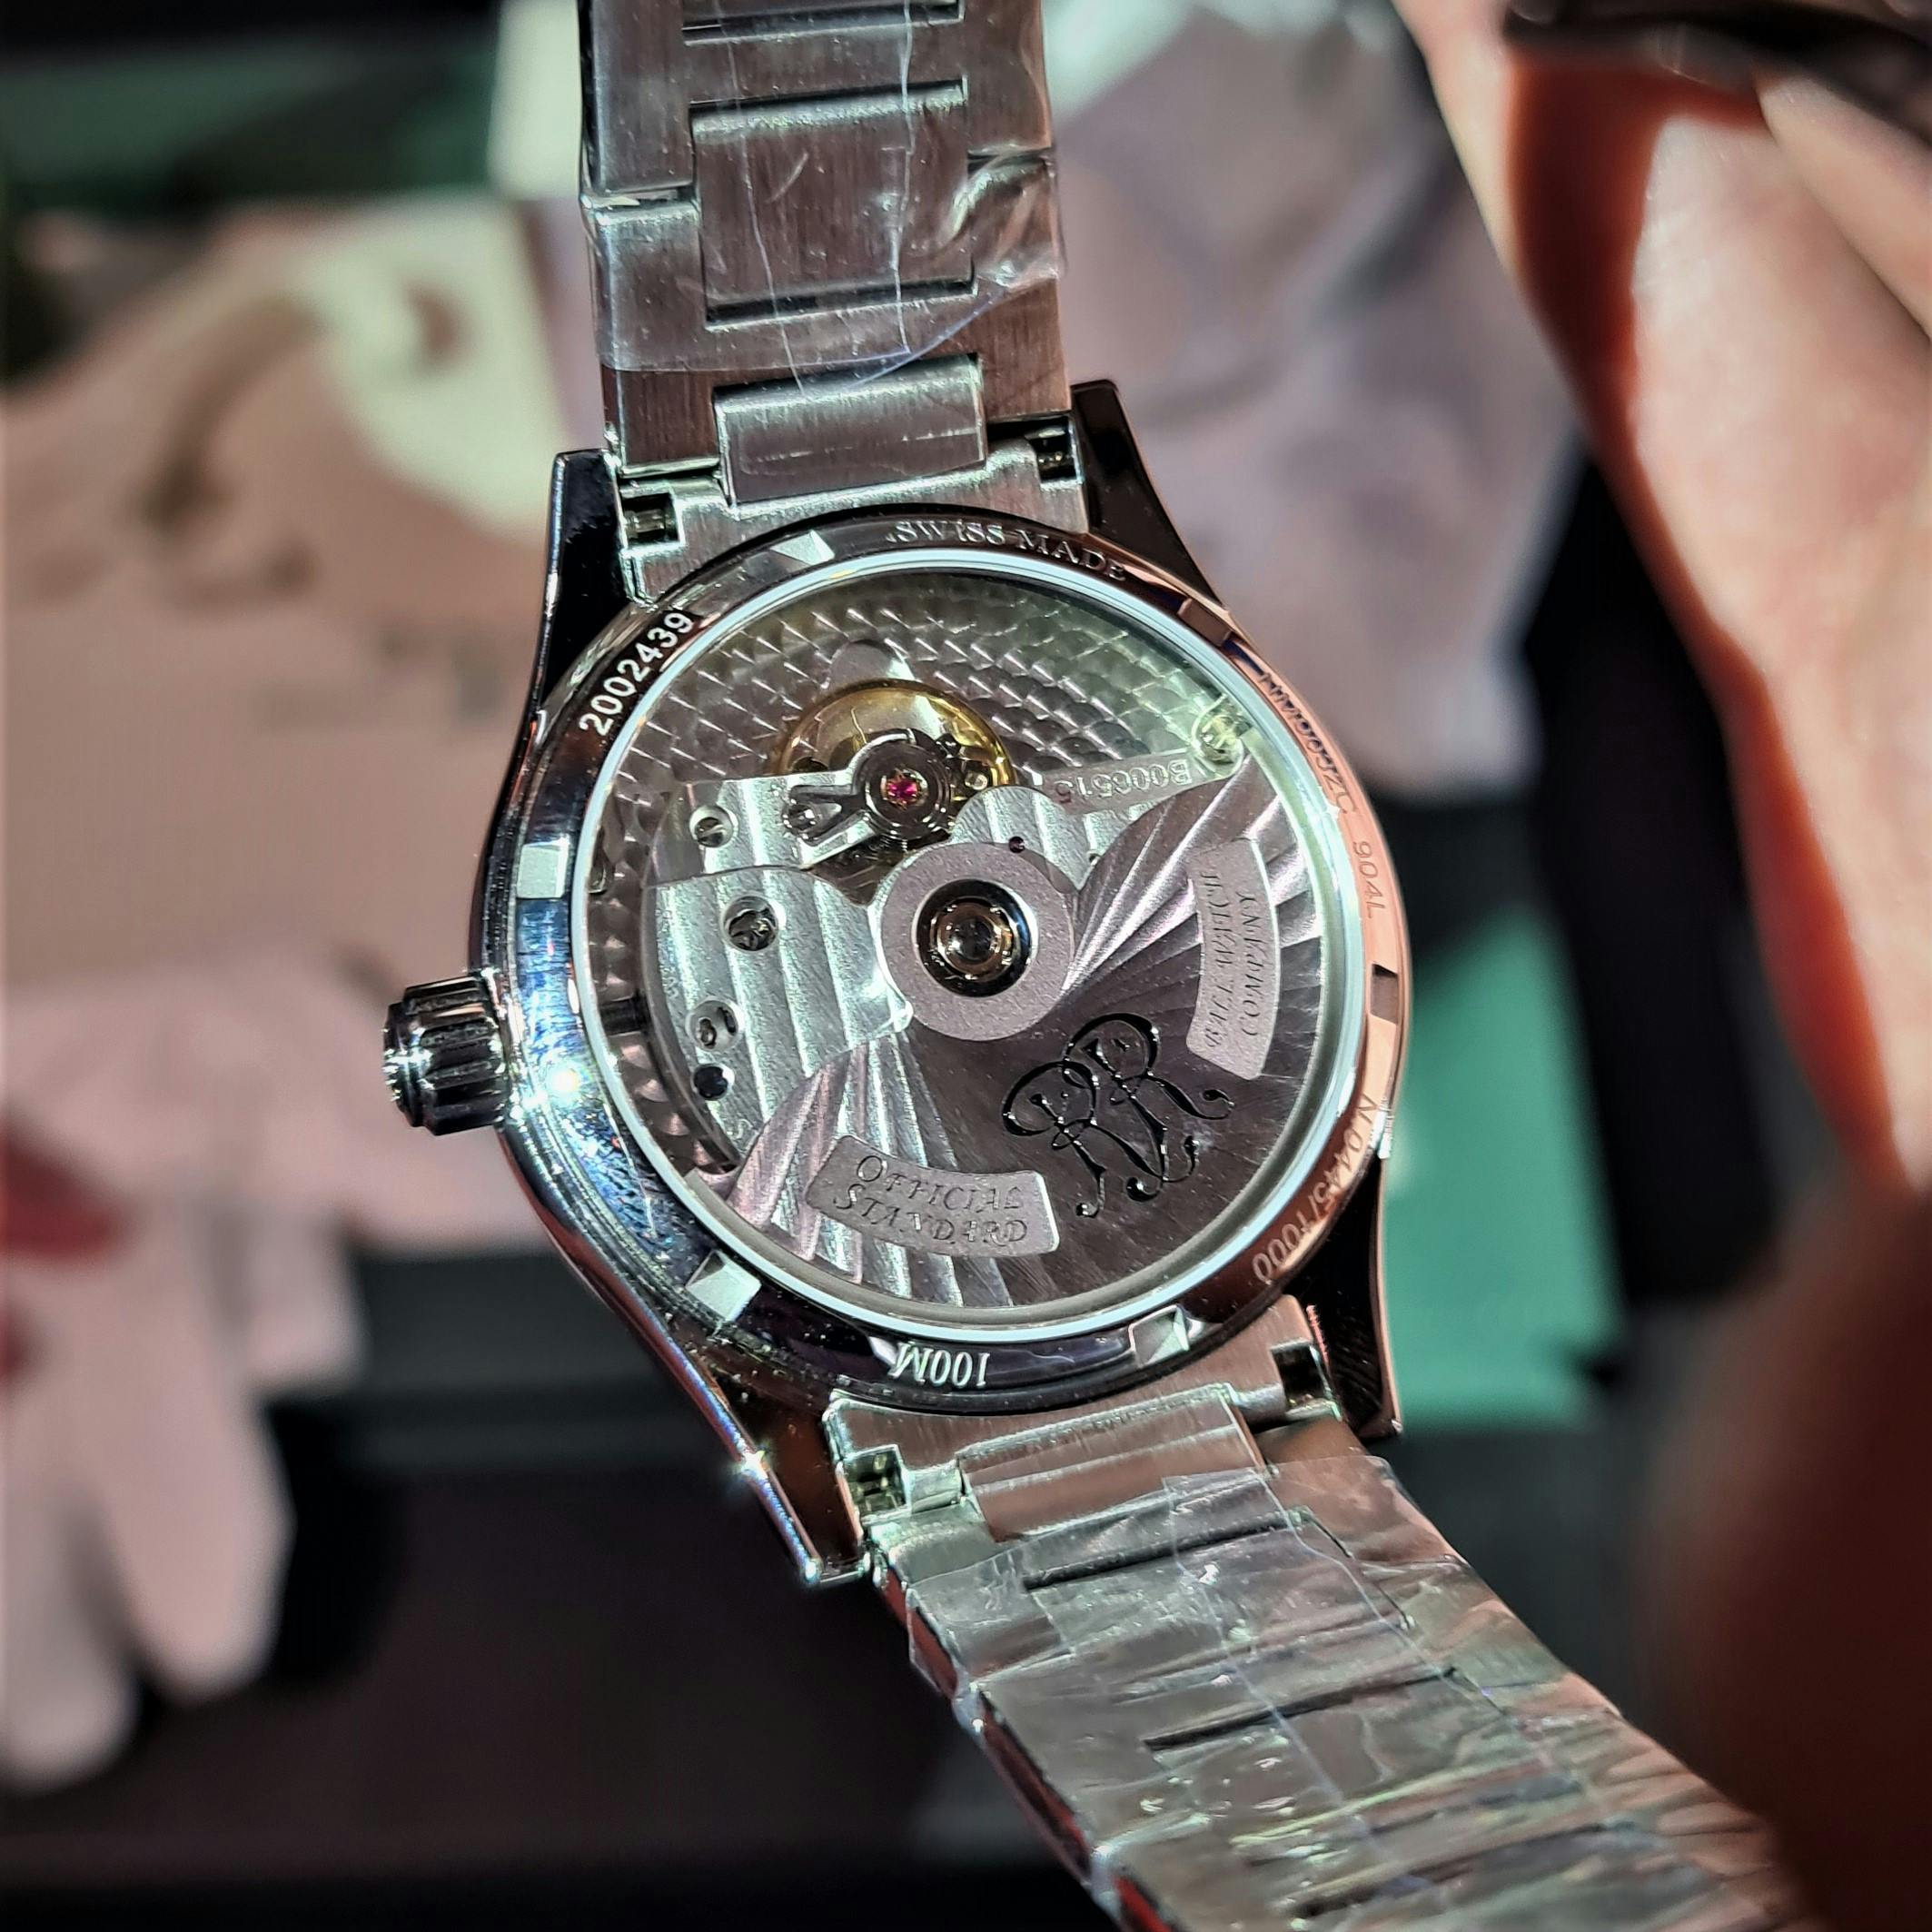 Steel silver Ball Corp. watch shown from the rear showing the engraved and decorated Rotor and movement